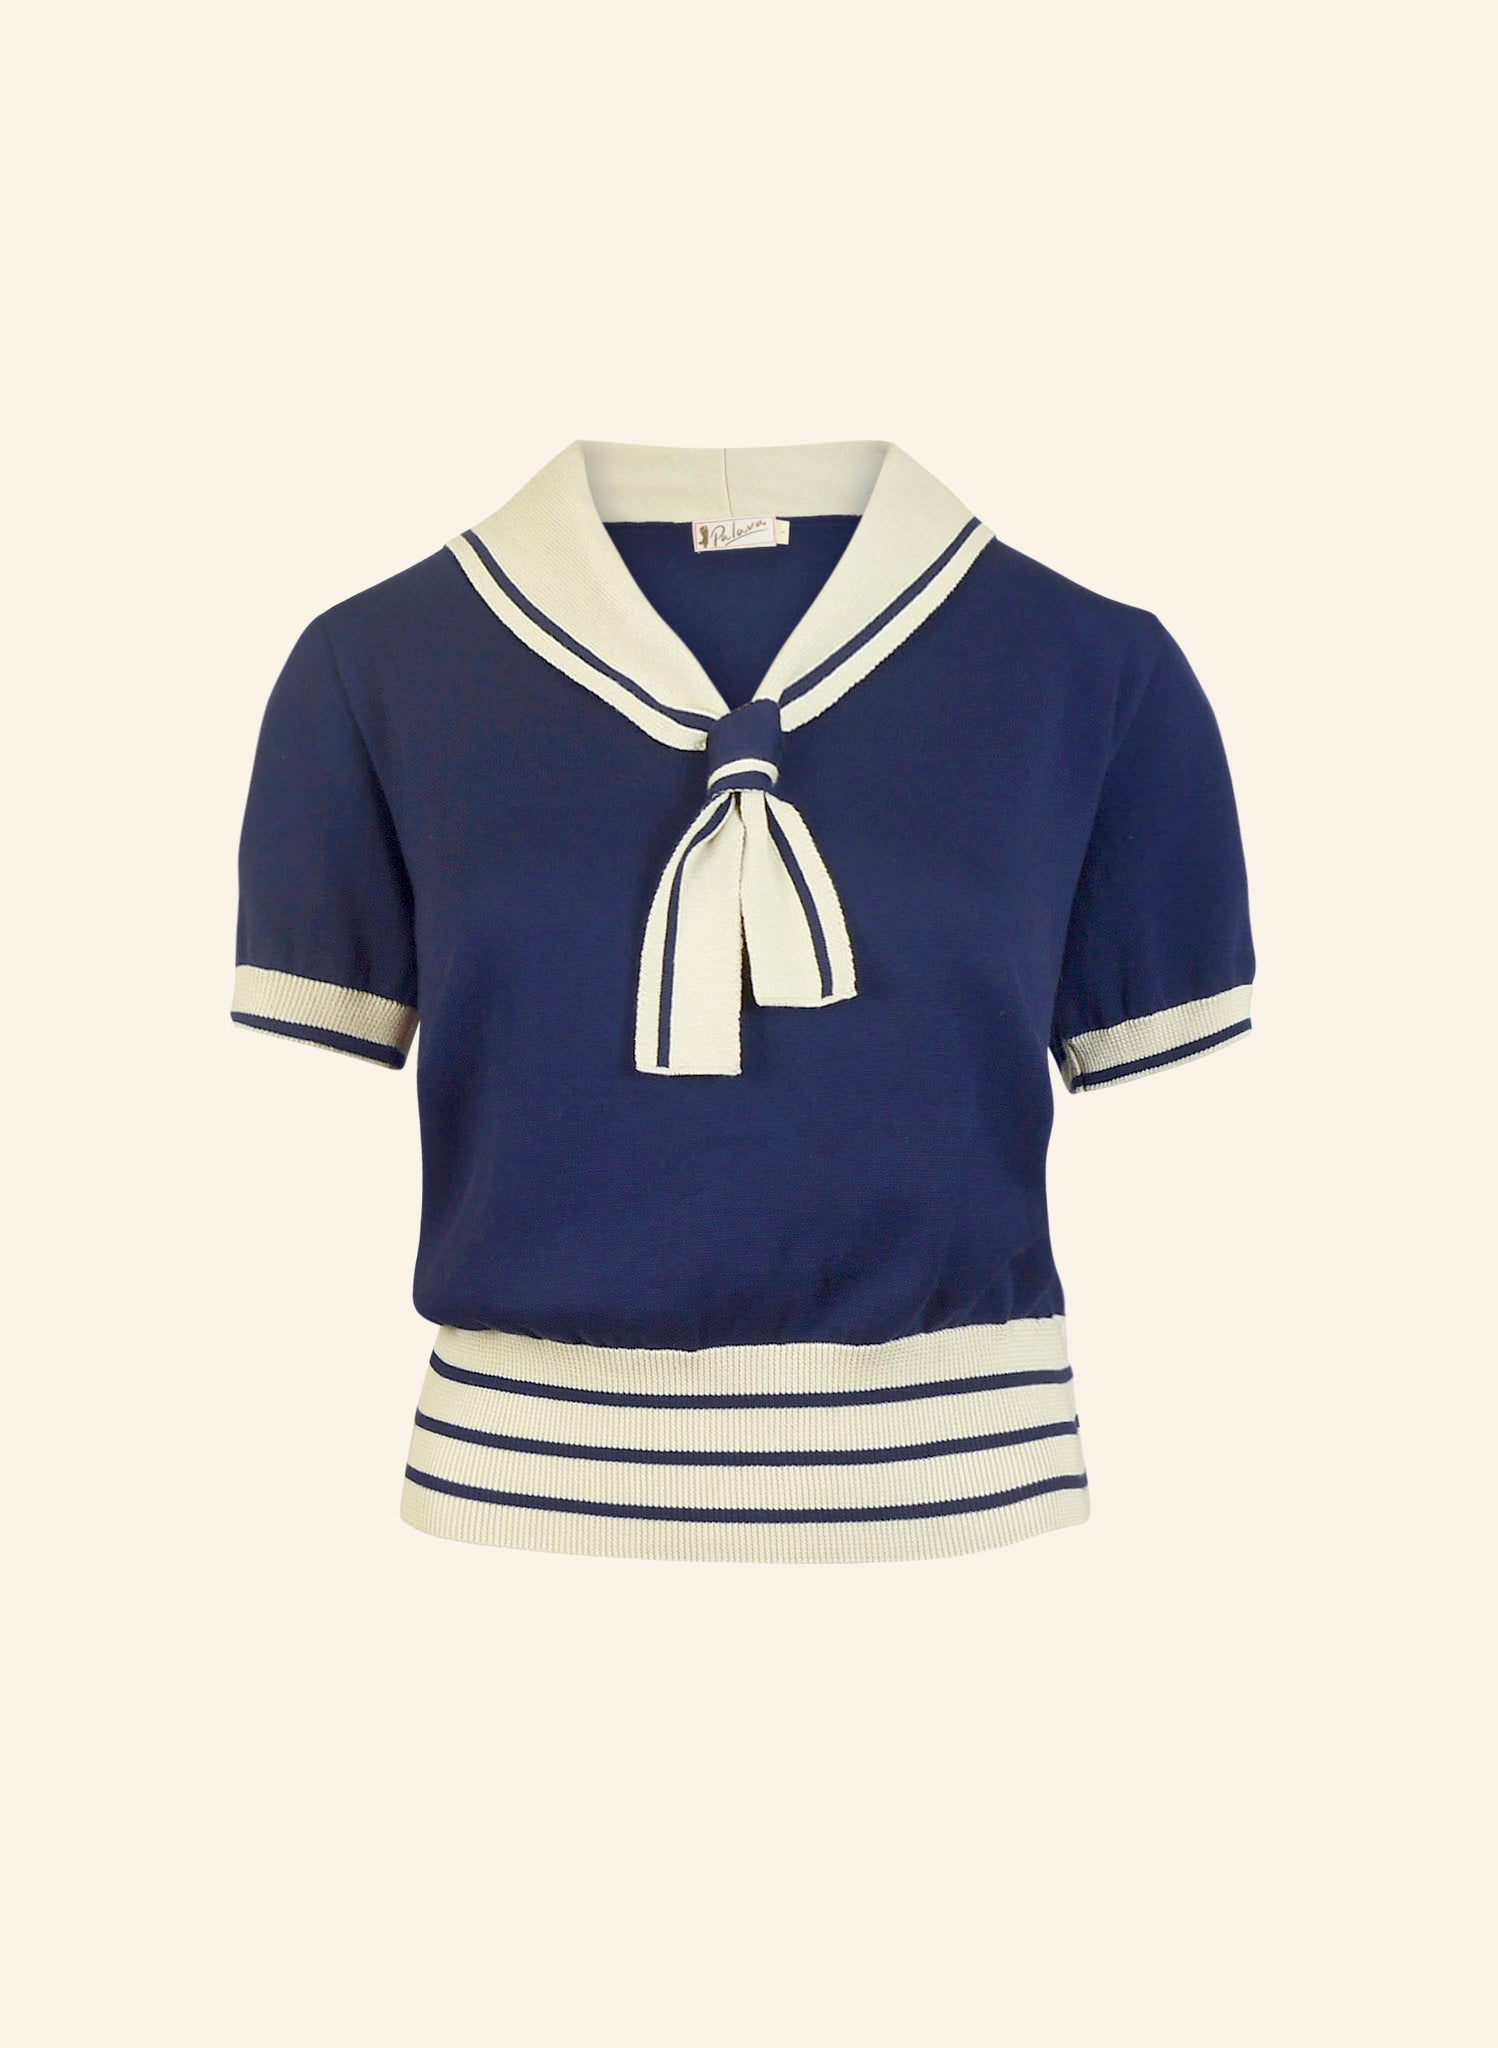 Sailor - Knitted Top - Navy